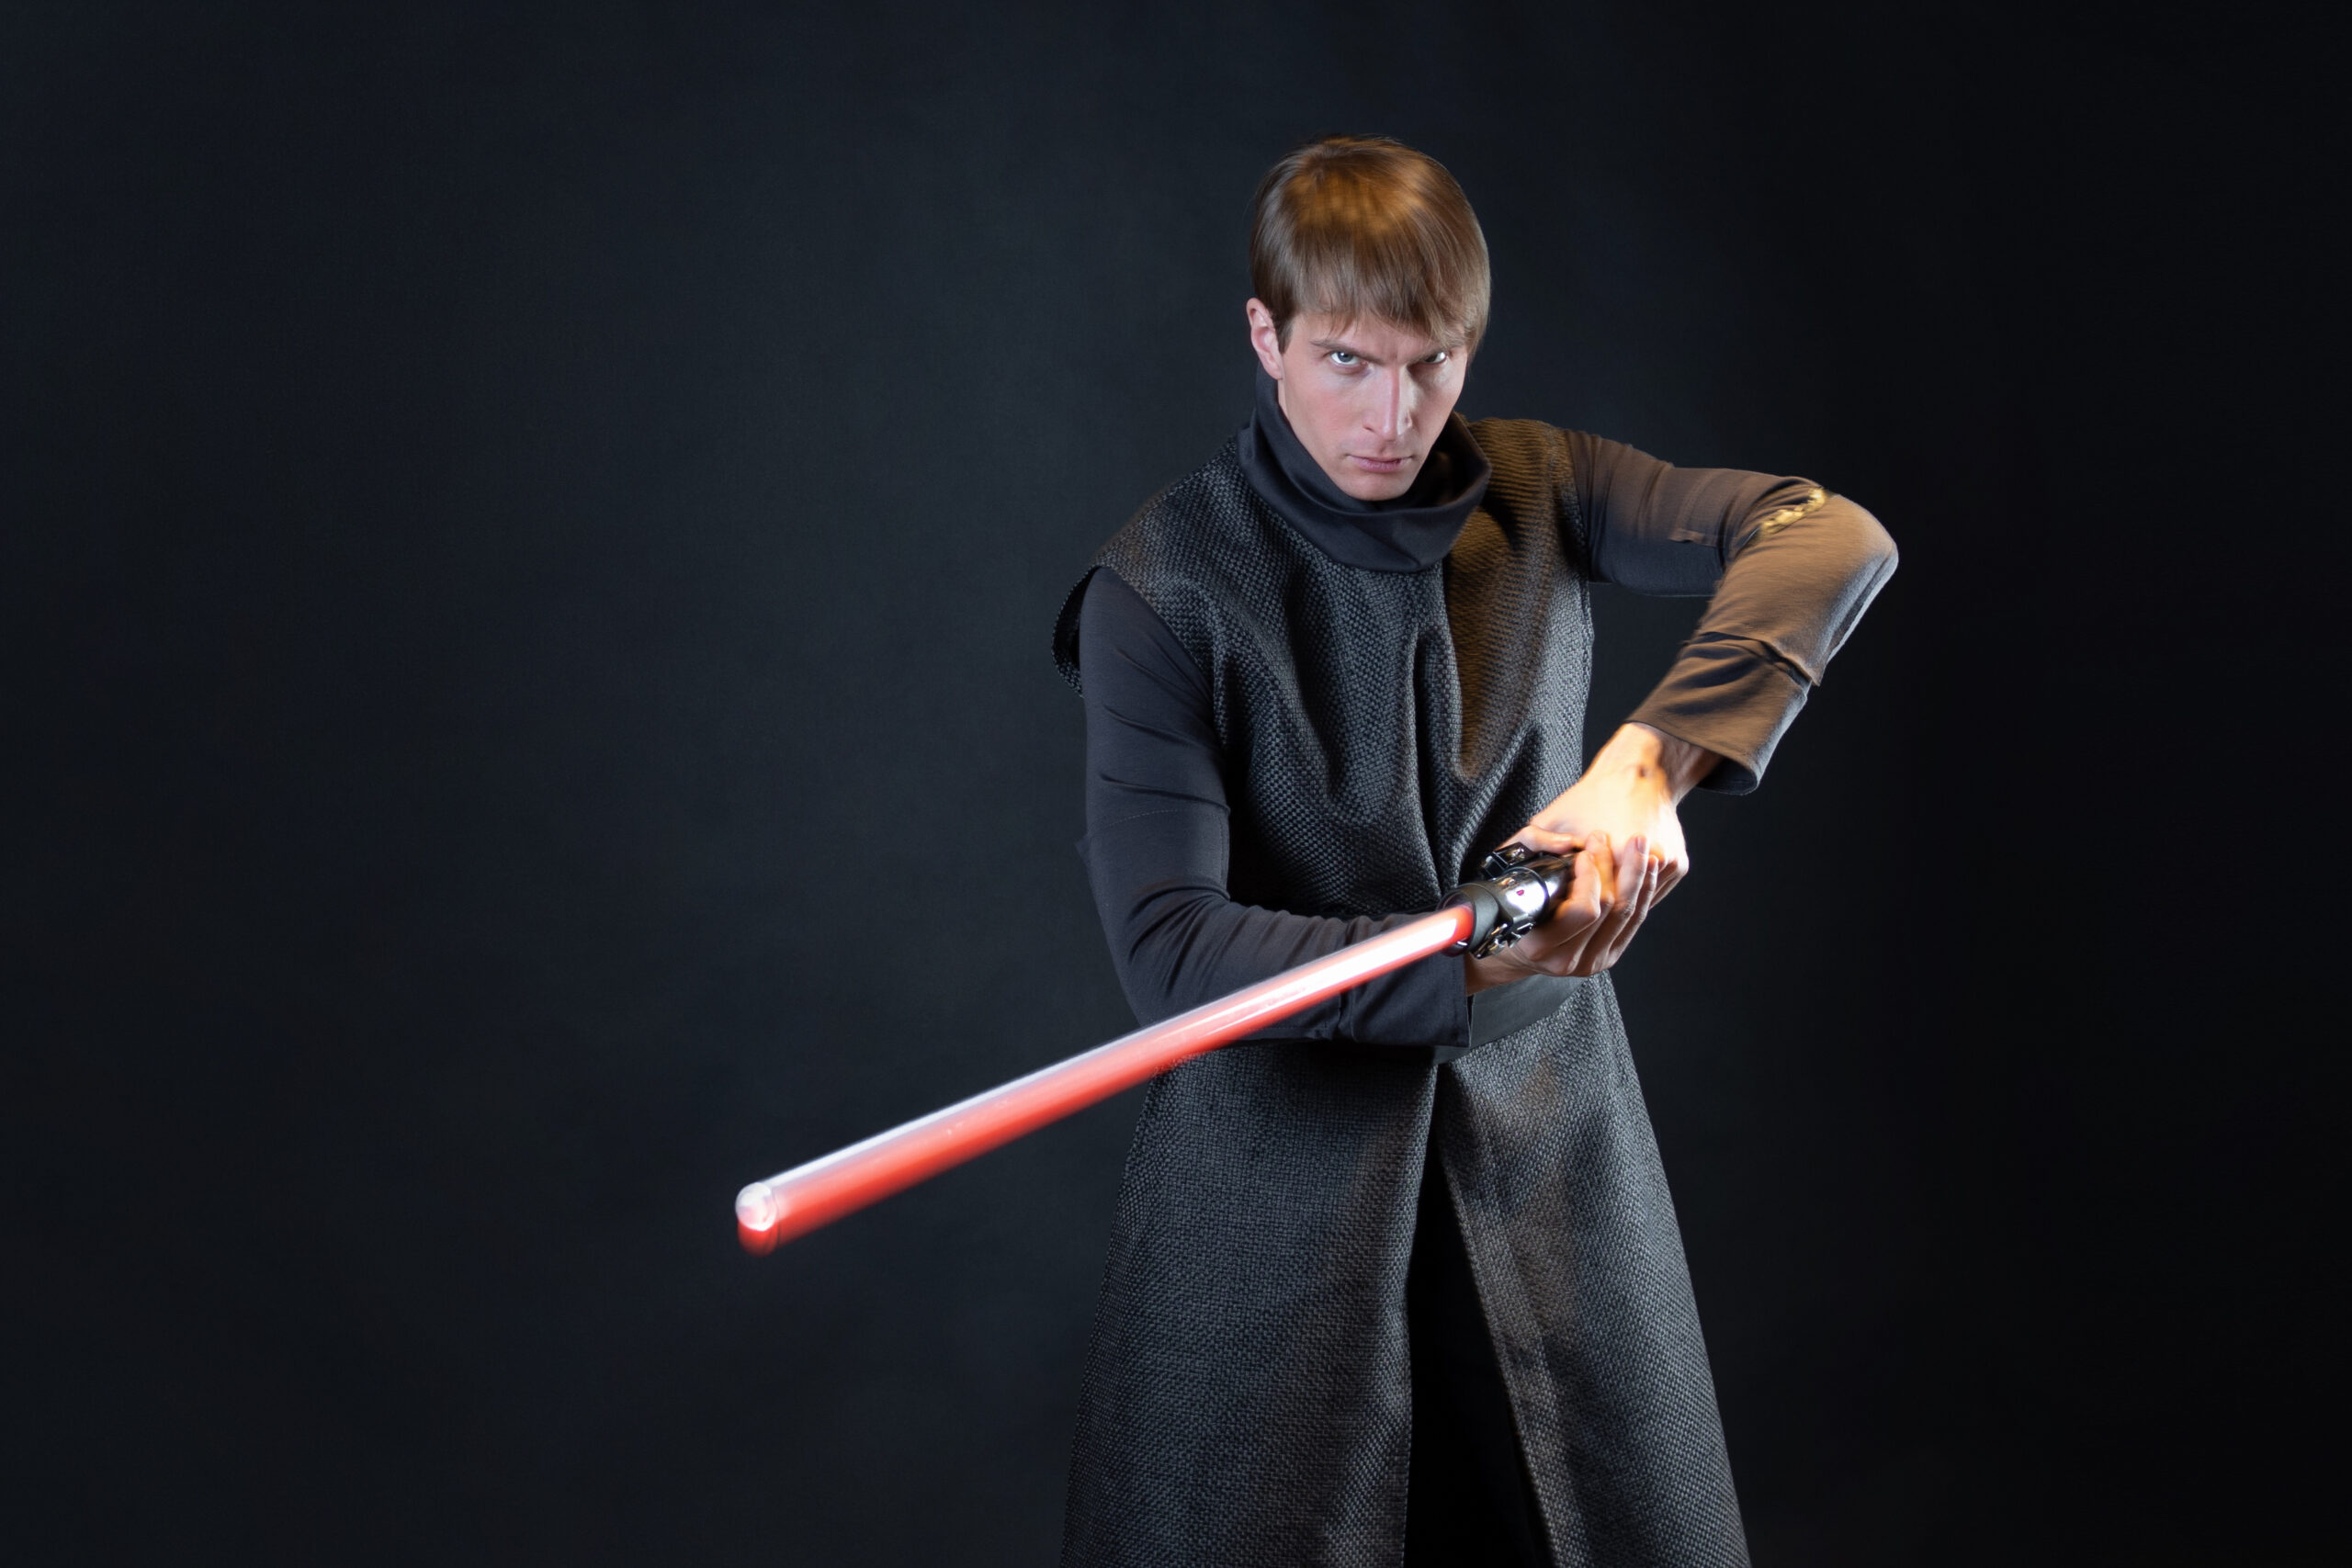 A Star Wars fan dressed as a villain and holding a red lightsaber